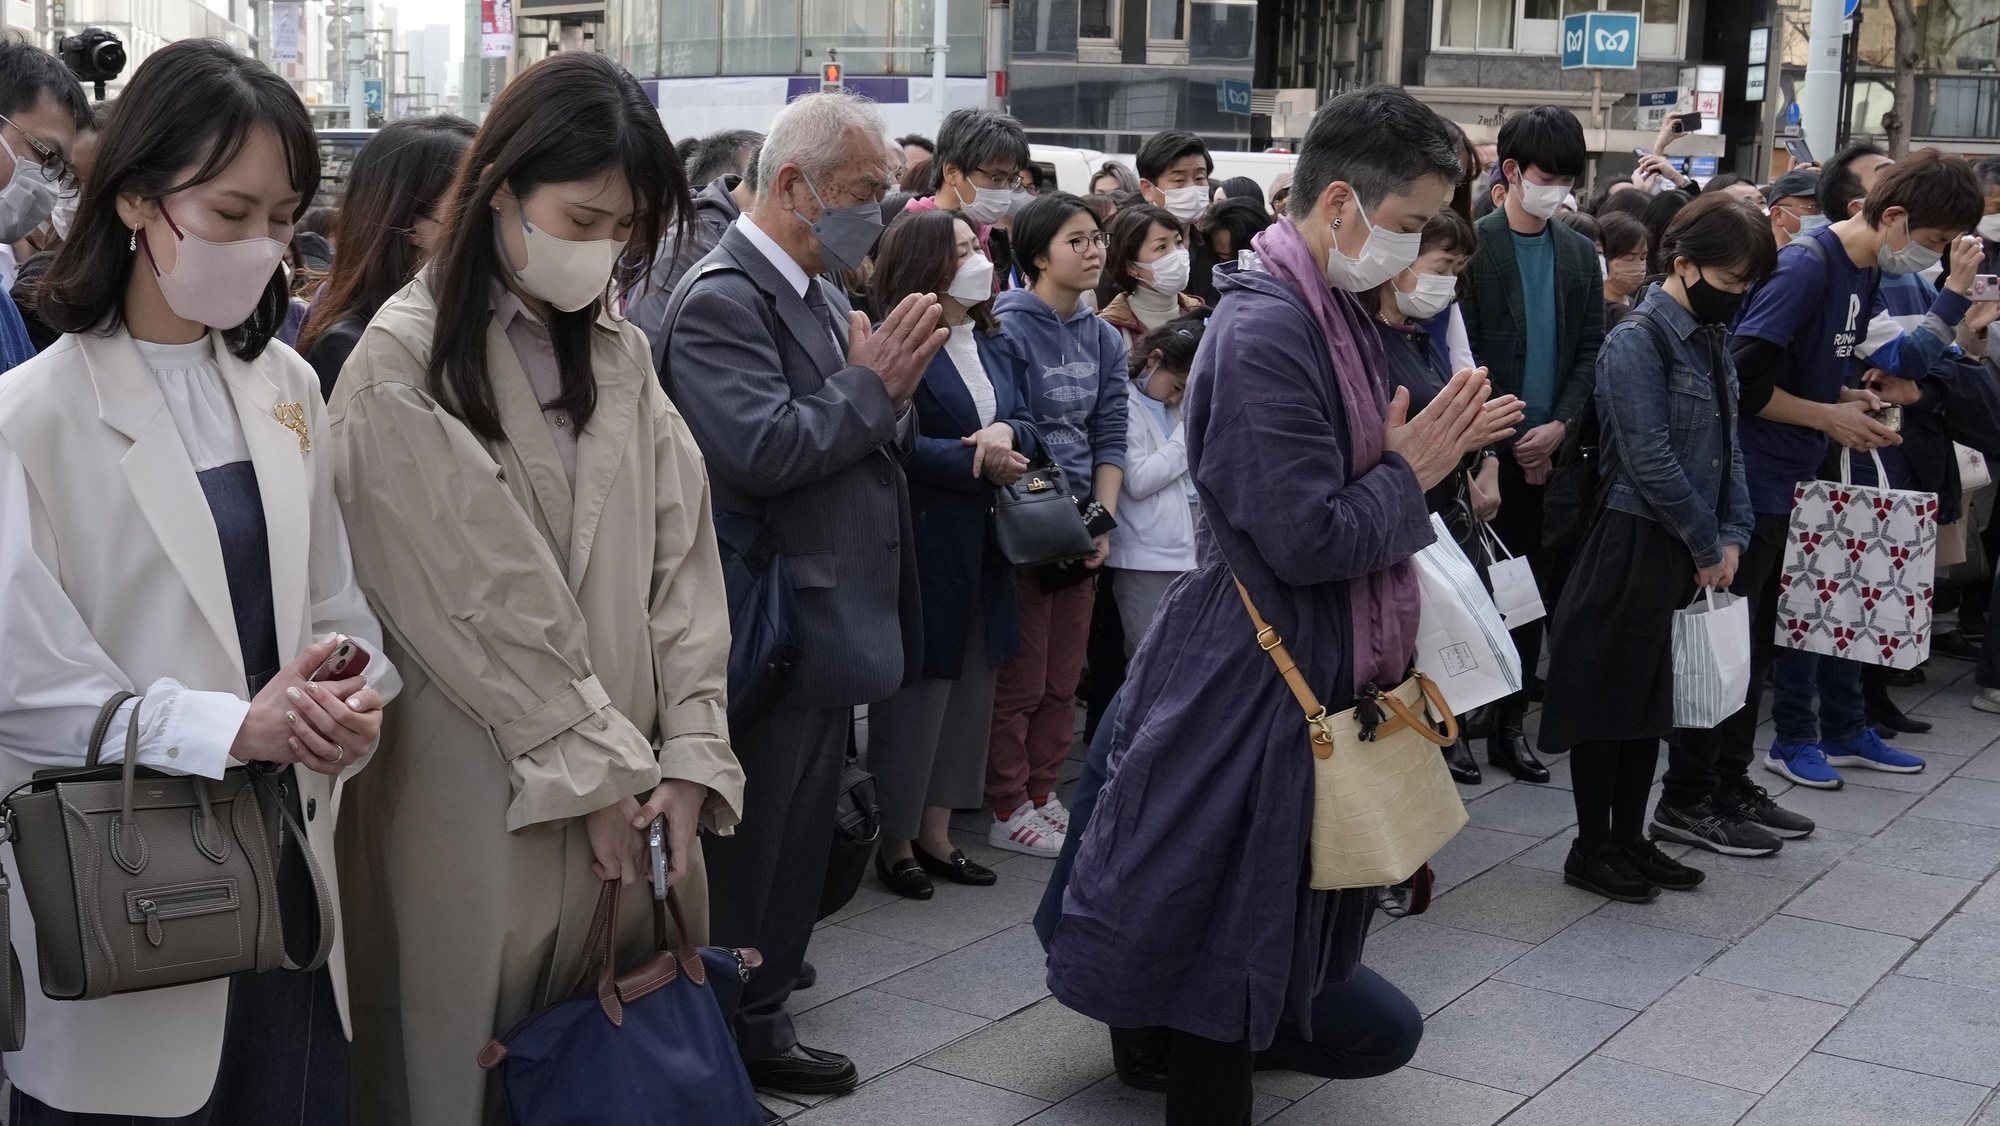 epa10514623 People offer a minute silent prayer for the victims of the &#039;Great East Japan Earthquake&#039; at the time the earthquake took place to mark its 12th anniversary, at Ginza in central Tokyo, Japan, 11 March 2023. The magnitude 9.0 earthquake triggered a tsunami that devastated the Tokyo Electric Power Company (TEPCO) Fukushima Daiichi Nuclear Power Plant, causing a nuclear accident, and the coastal side of northern Japan, killing about 16,000 people and leaving more than 2500 still missing. According to the National Police Agency, another 3,800 people died as a result of the earthquake.  EPA/KIMIMASA MAYAMA